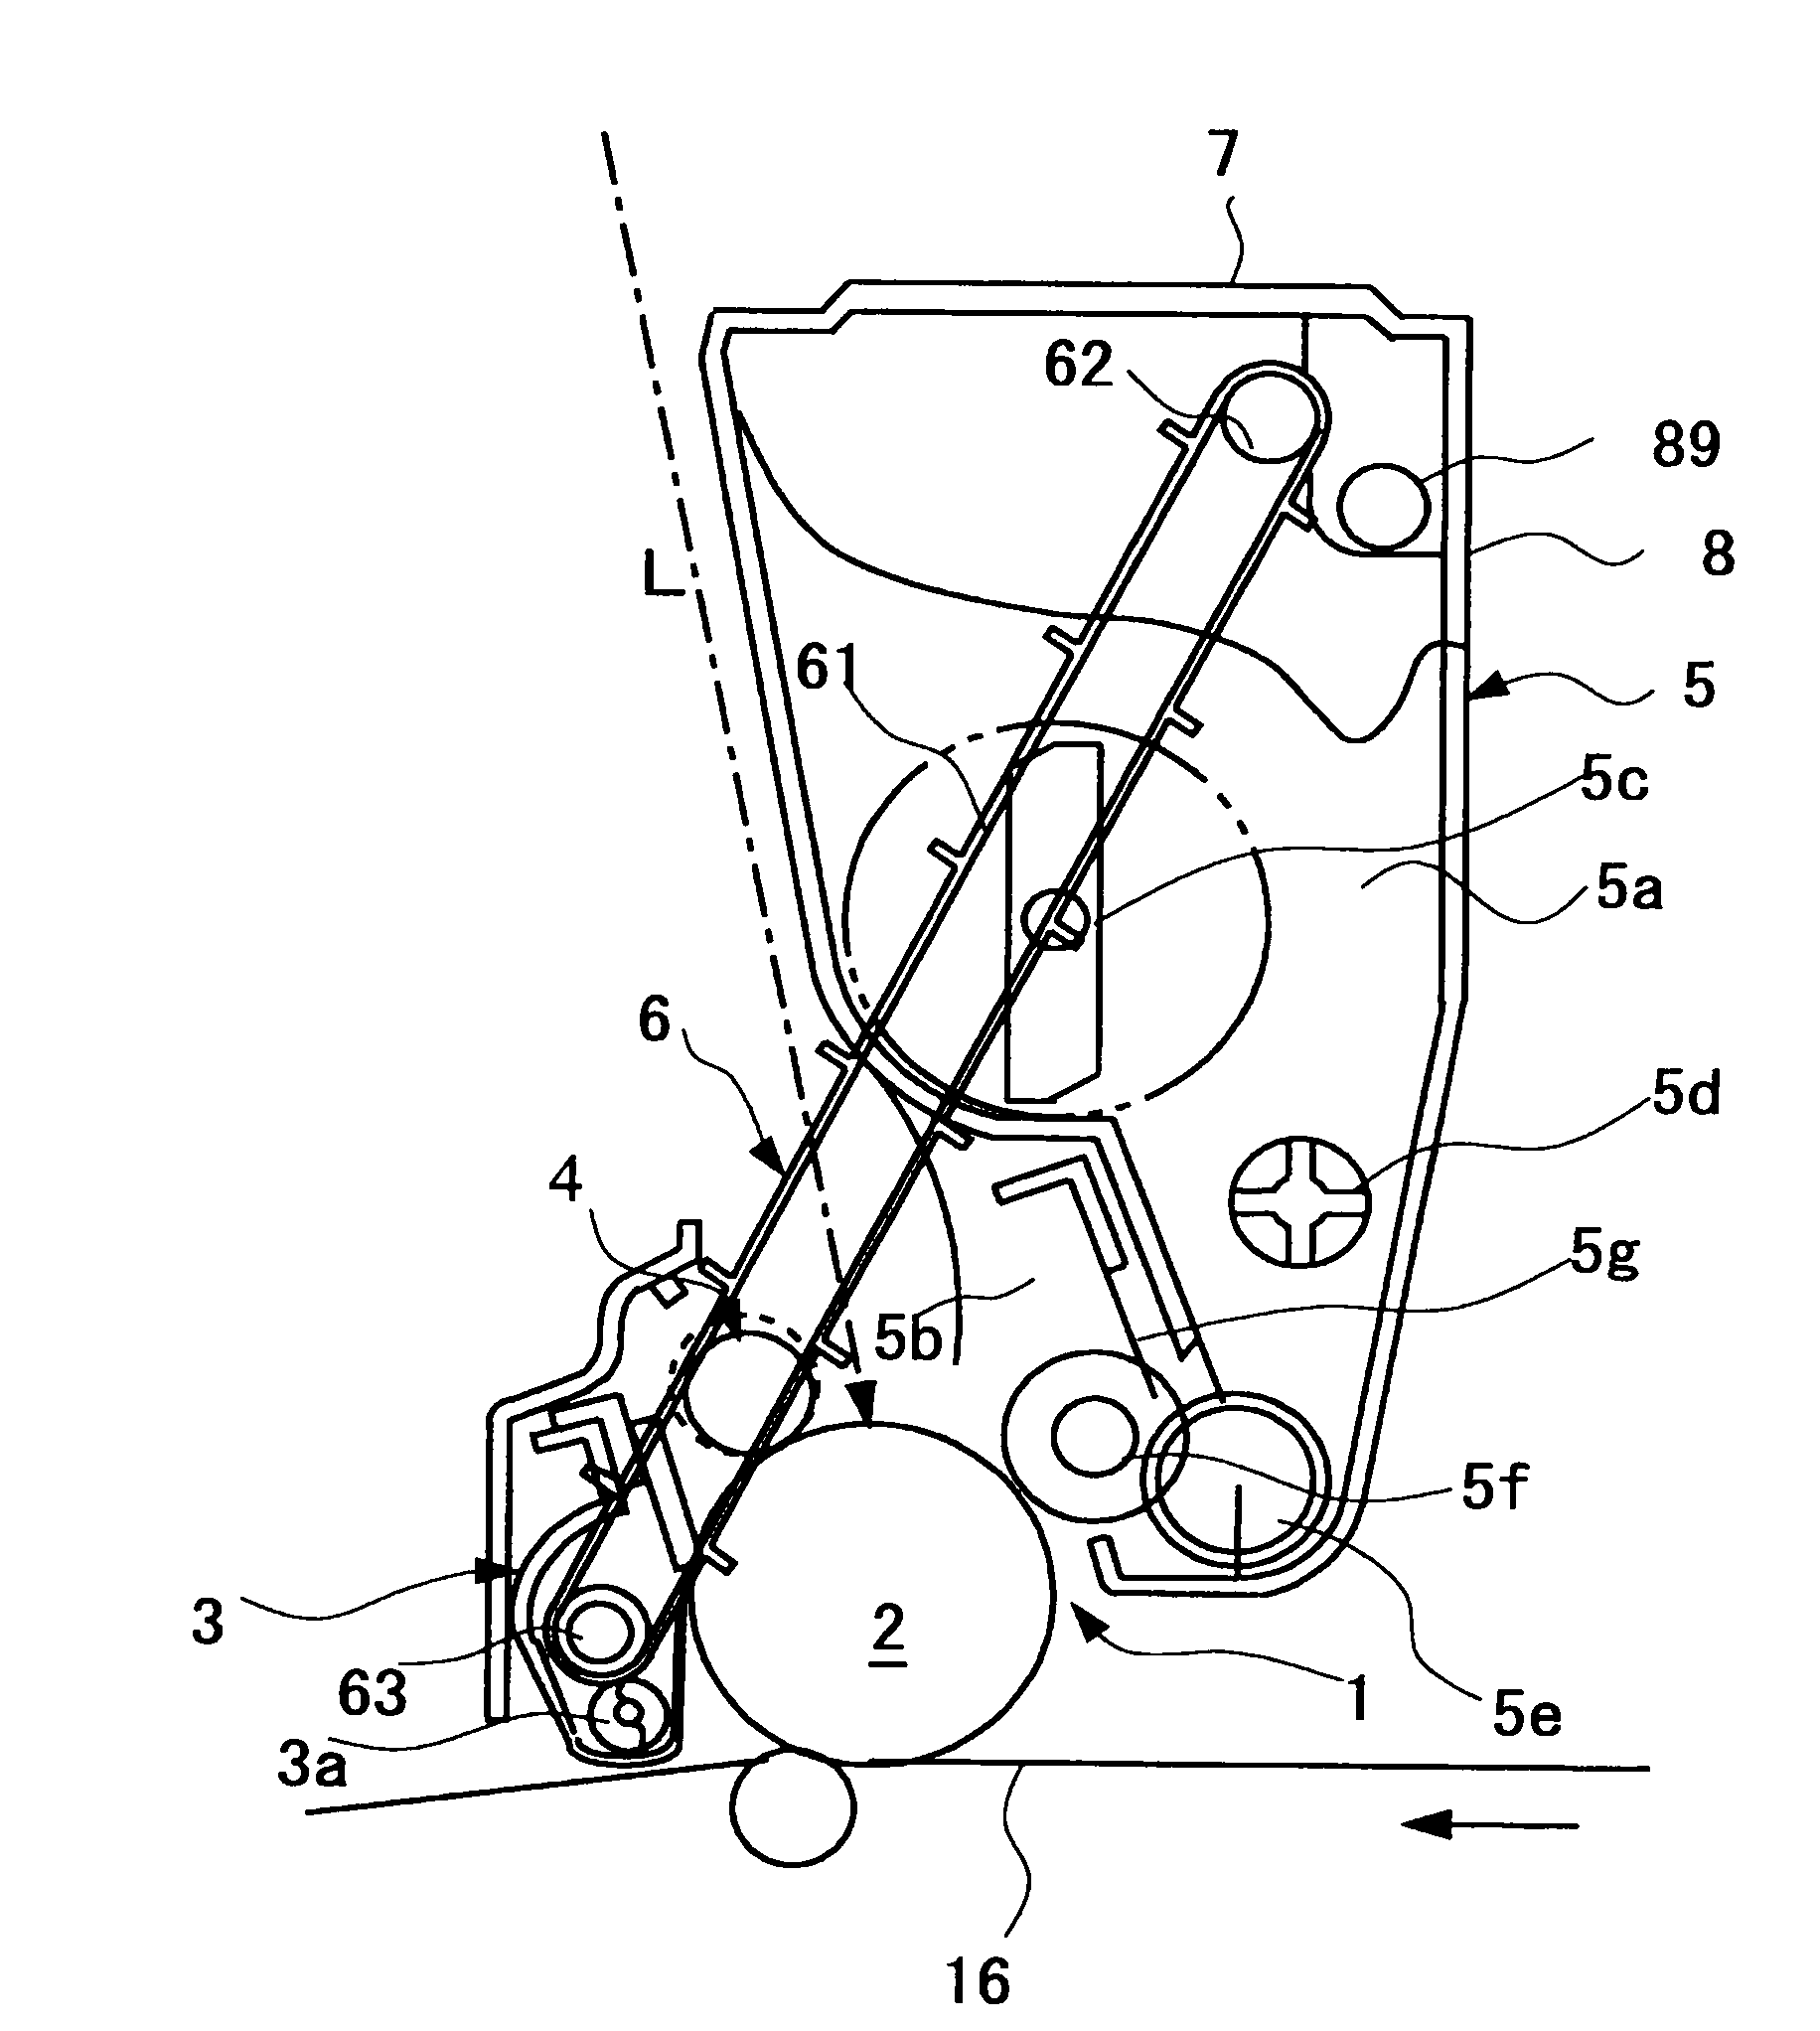 Toner recovery apparatus, process cartridge, and image forming apparatus